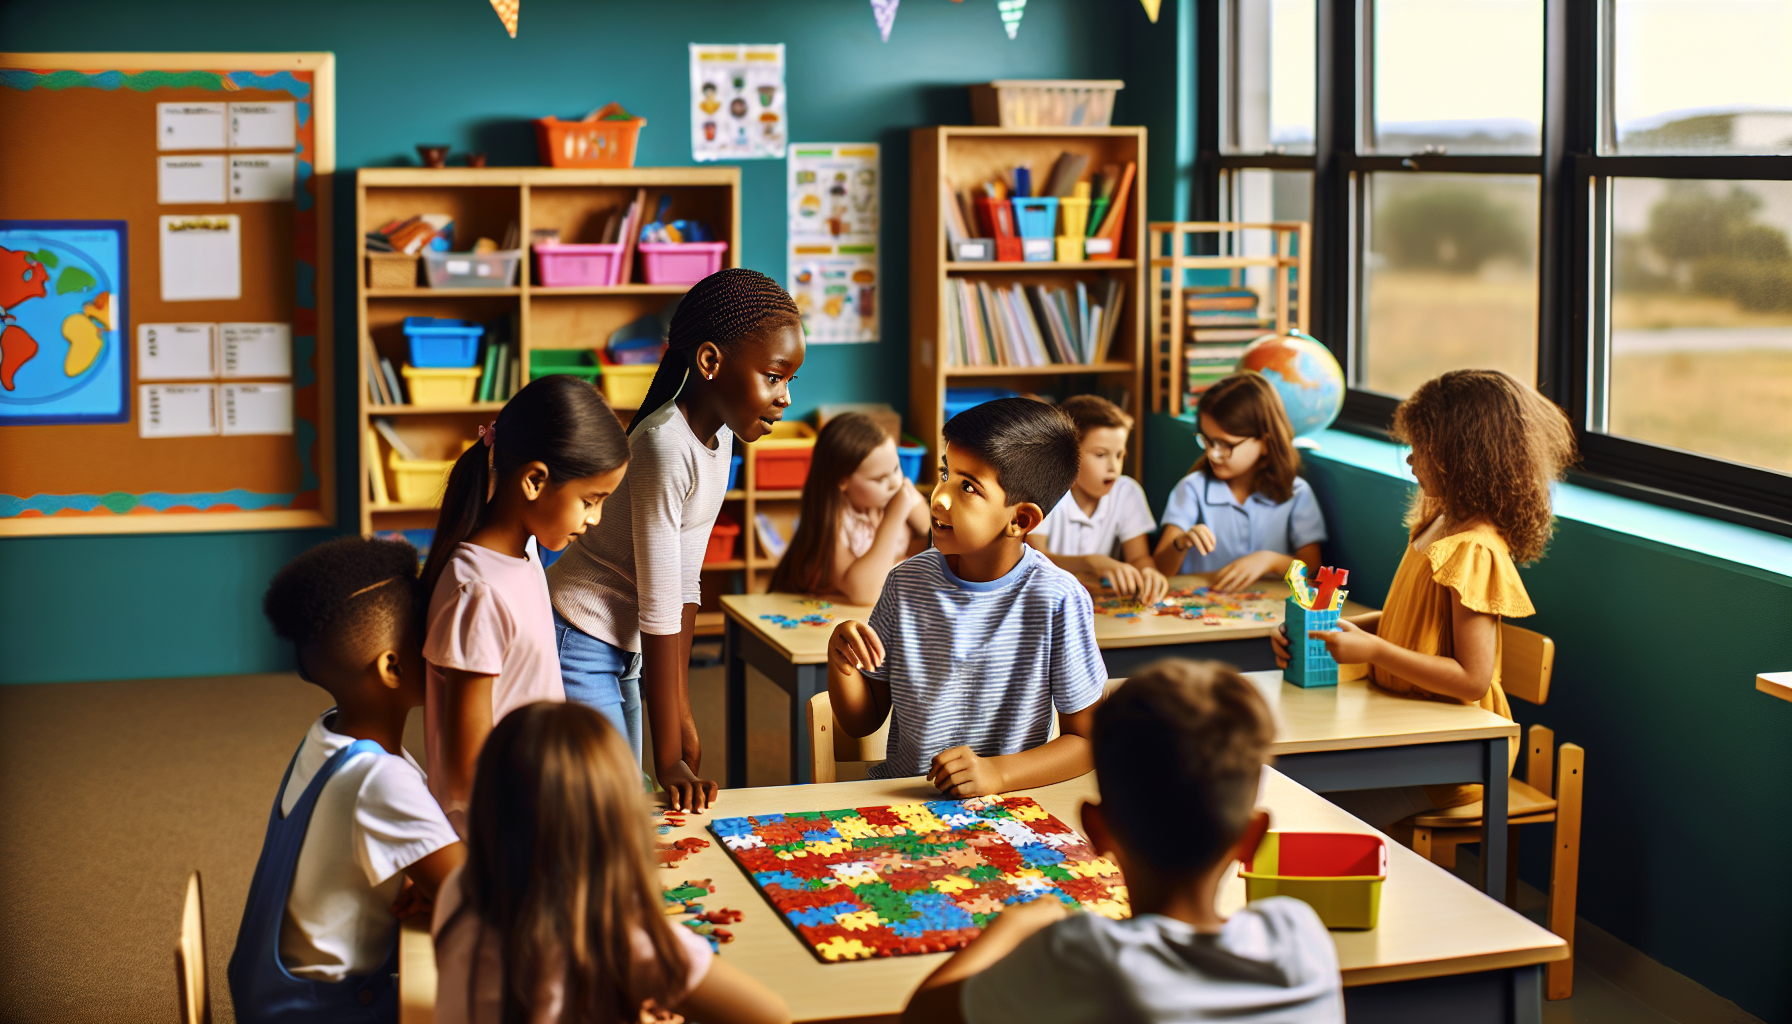 Photo of children in a classroom with educational materials